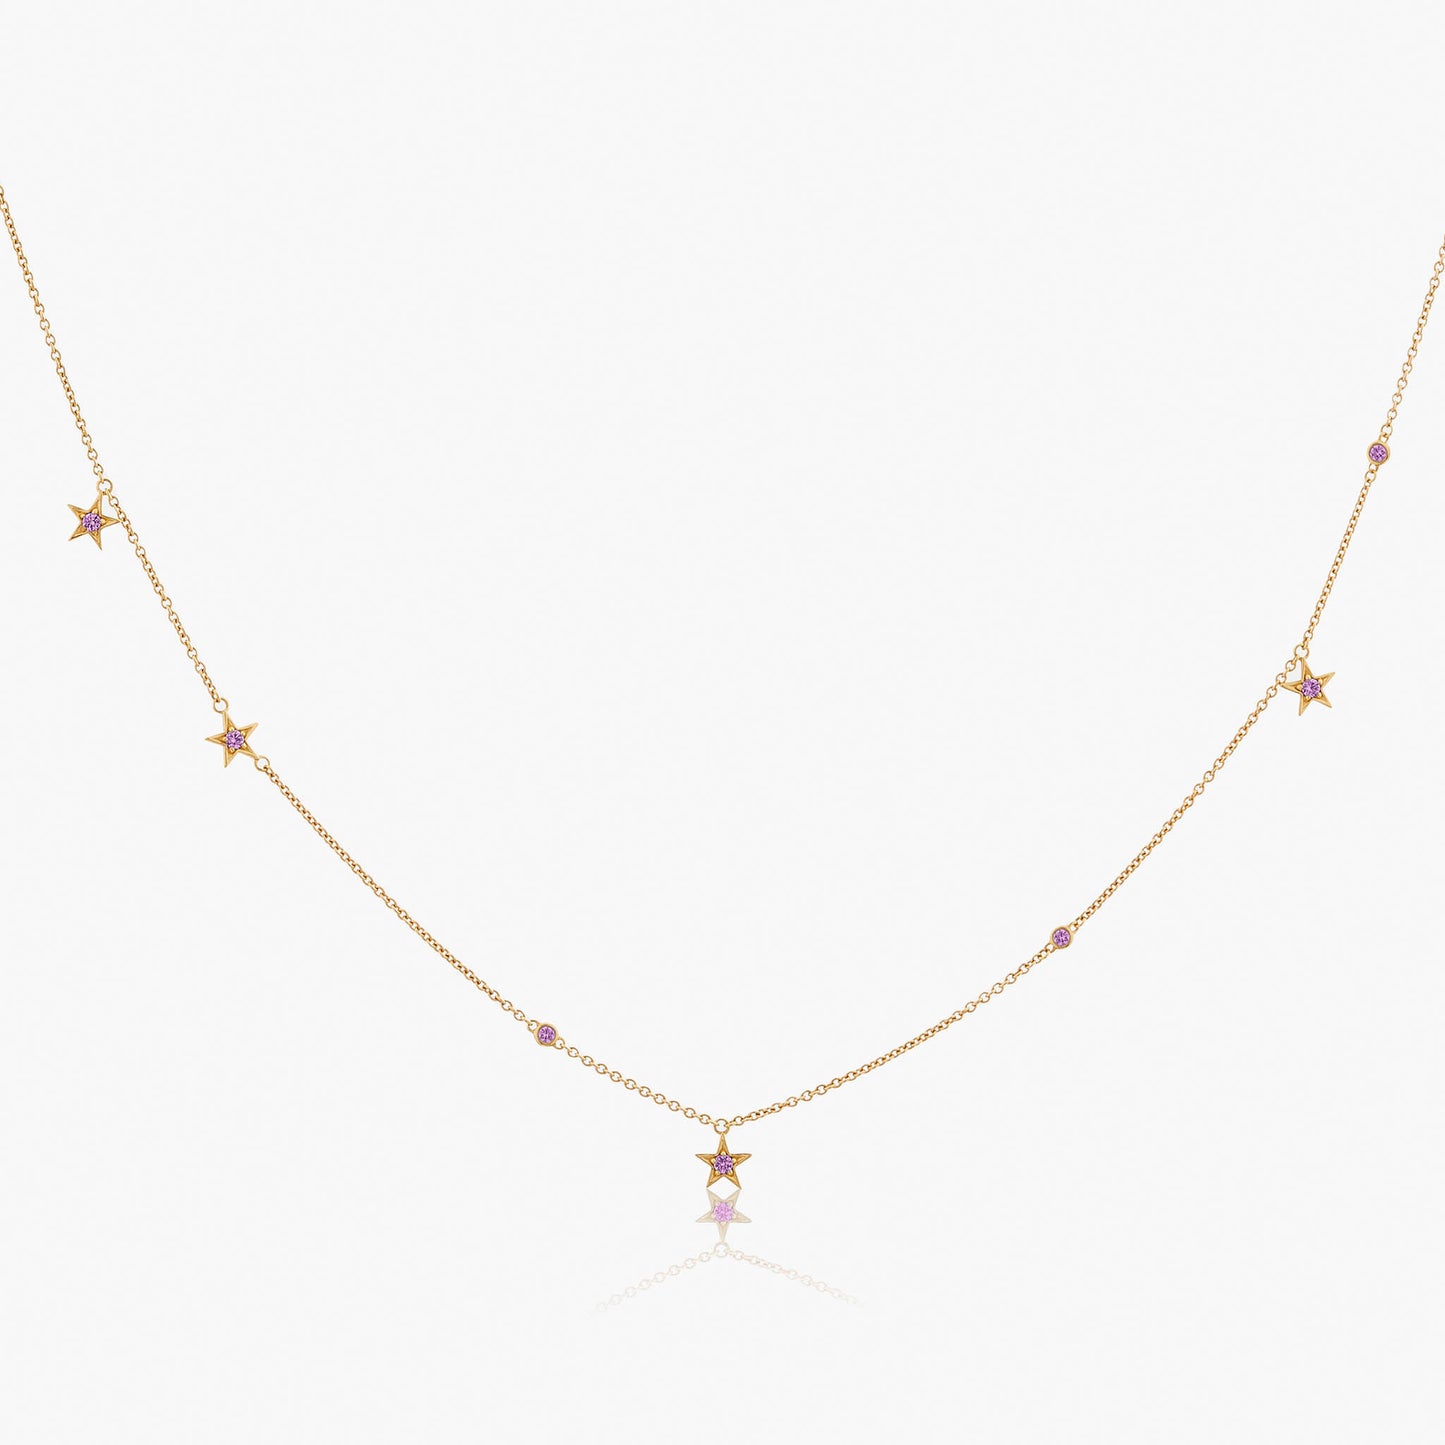 Guiding Star 18ct Yellow Gold & Pink Sapphire Necklace, 70cm